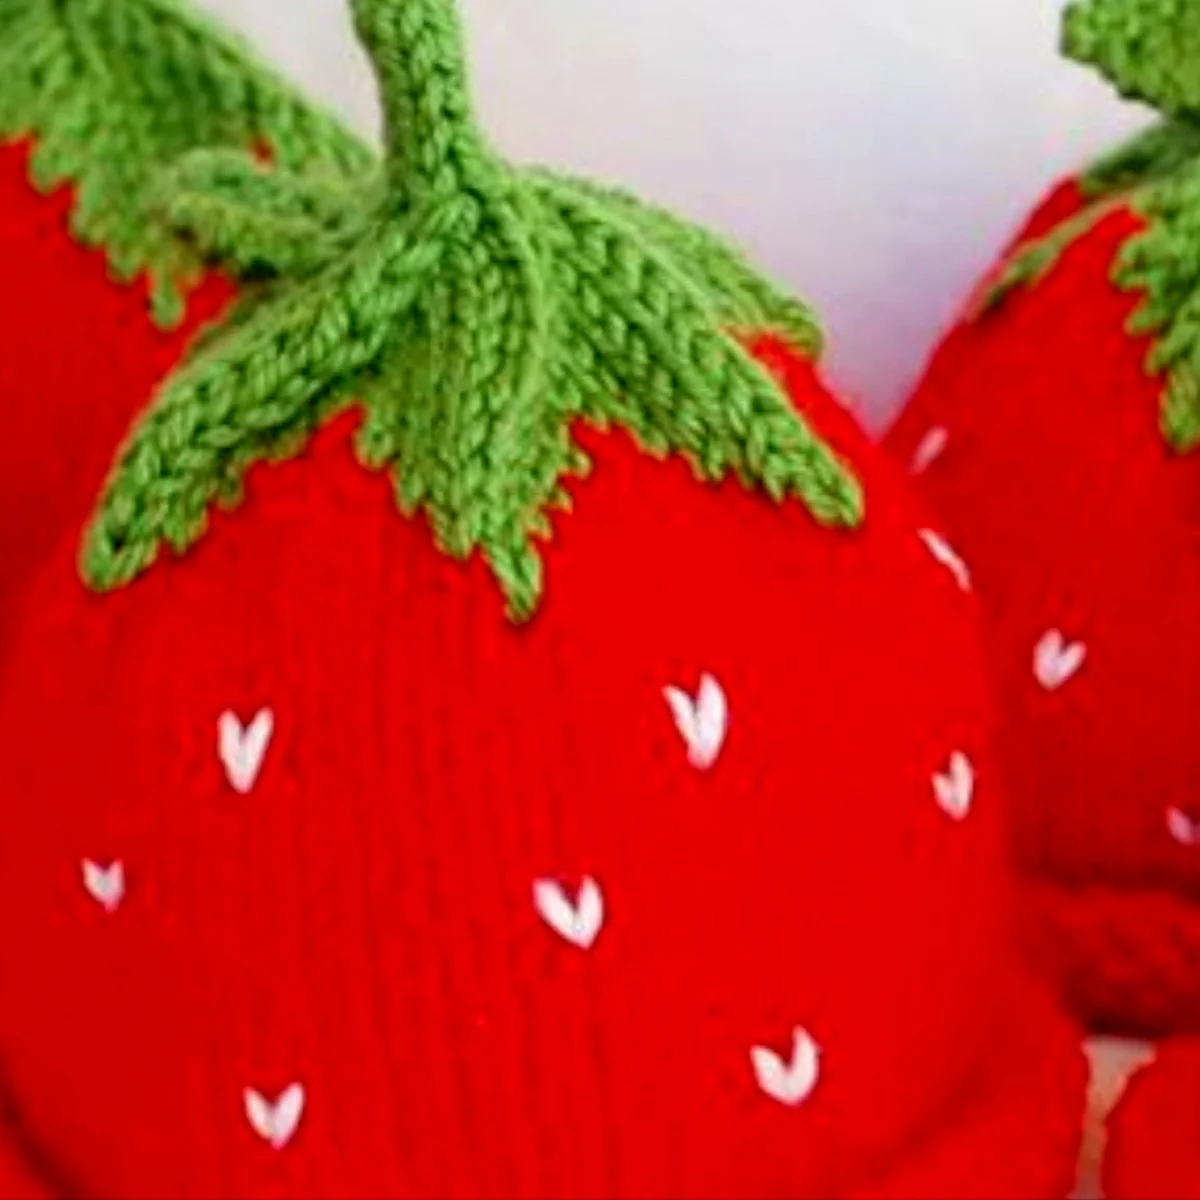 Strawberry Baby Hat knitted with red, green, and white yarn colors.